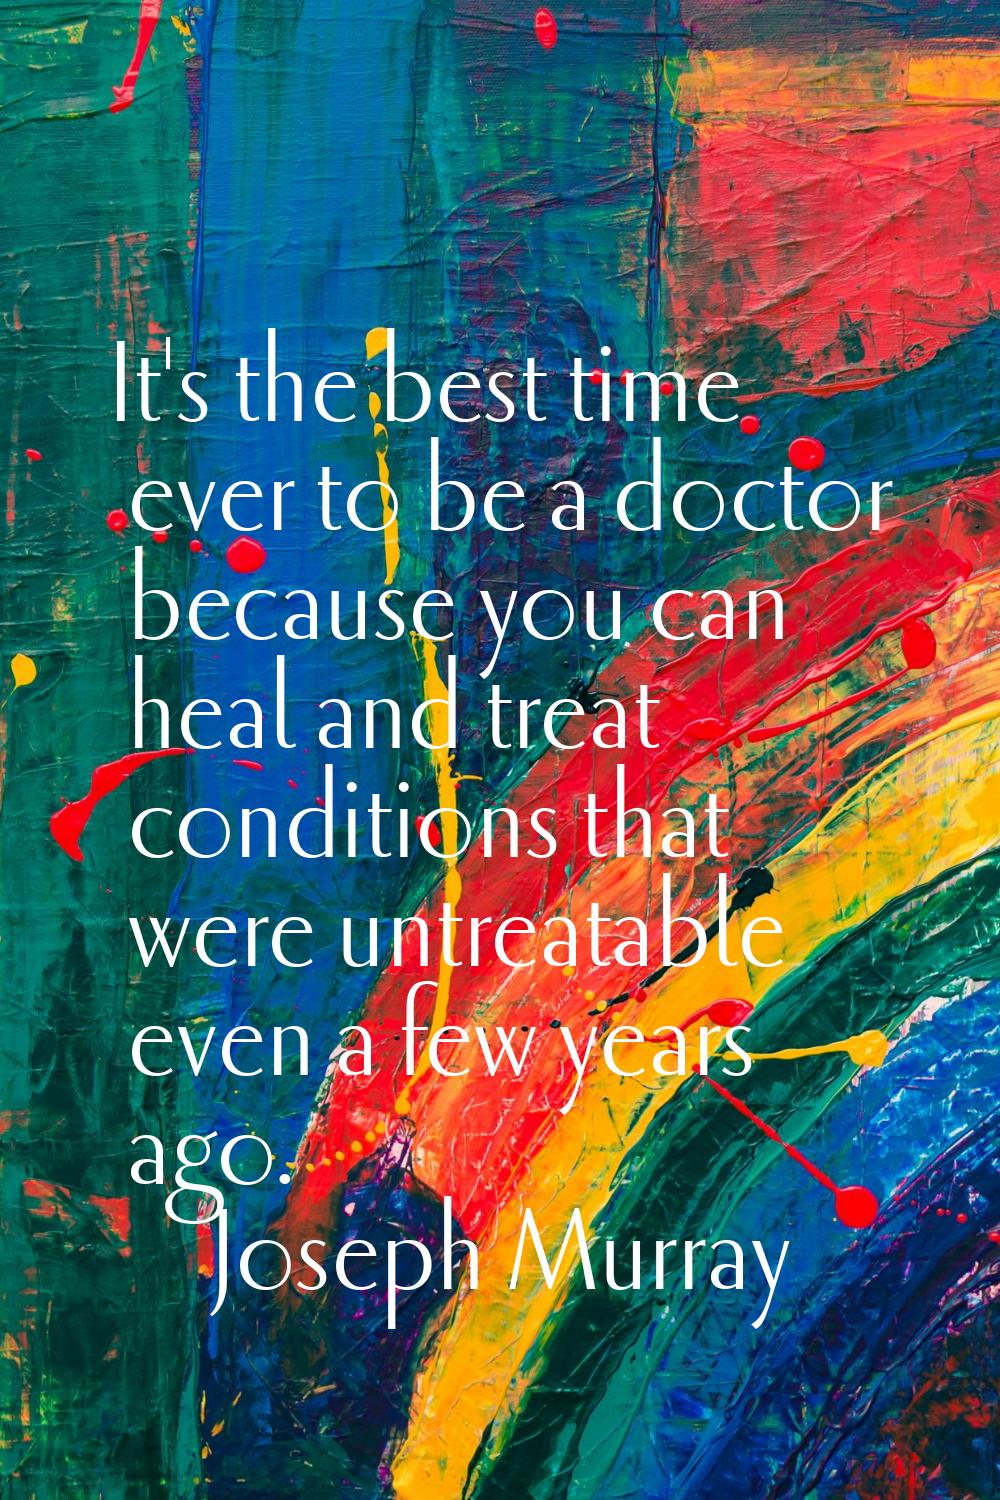 It's the best time ever to be a doctor because you can heal and treat conditions that were untreata